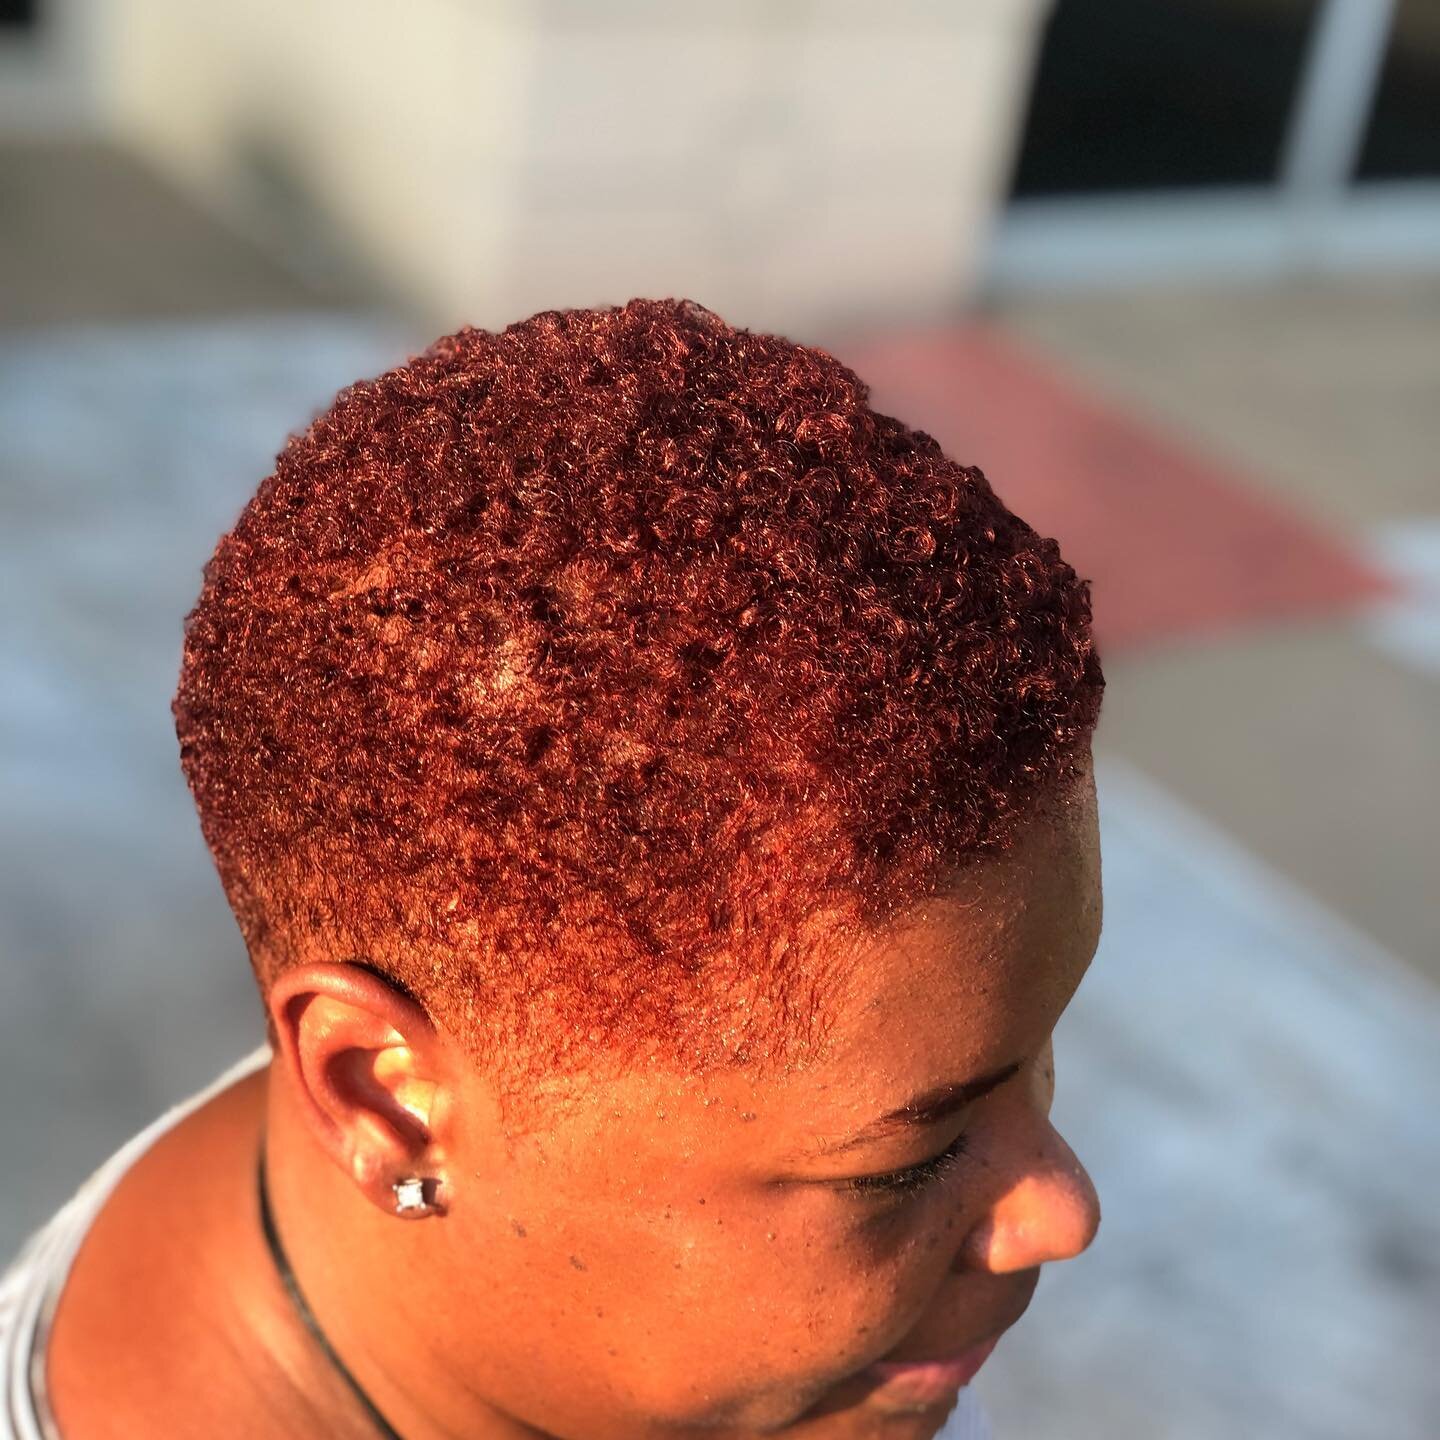 It&rsquo;s the Color and Cut for me #stylebykenya #inspiredbyhair #copperhair #redhair #fallhair #coils #naturalhair #hautteartistry #memphishairstylist #cordovahairstylist #901hair #salonsuite #salon #naturallight